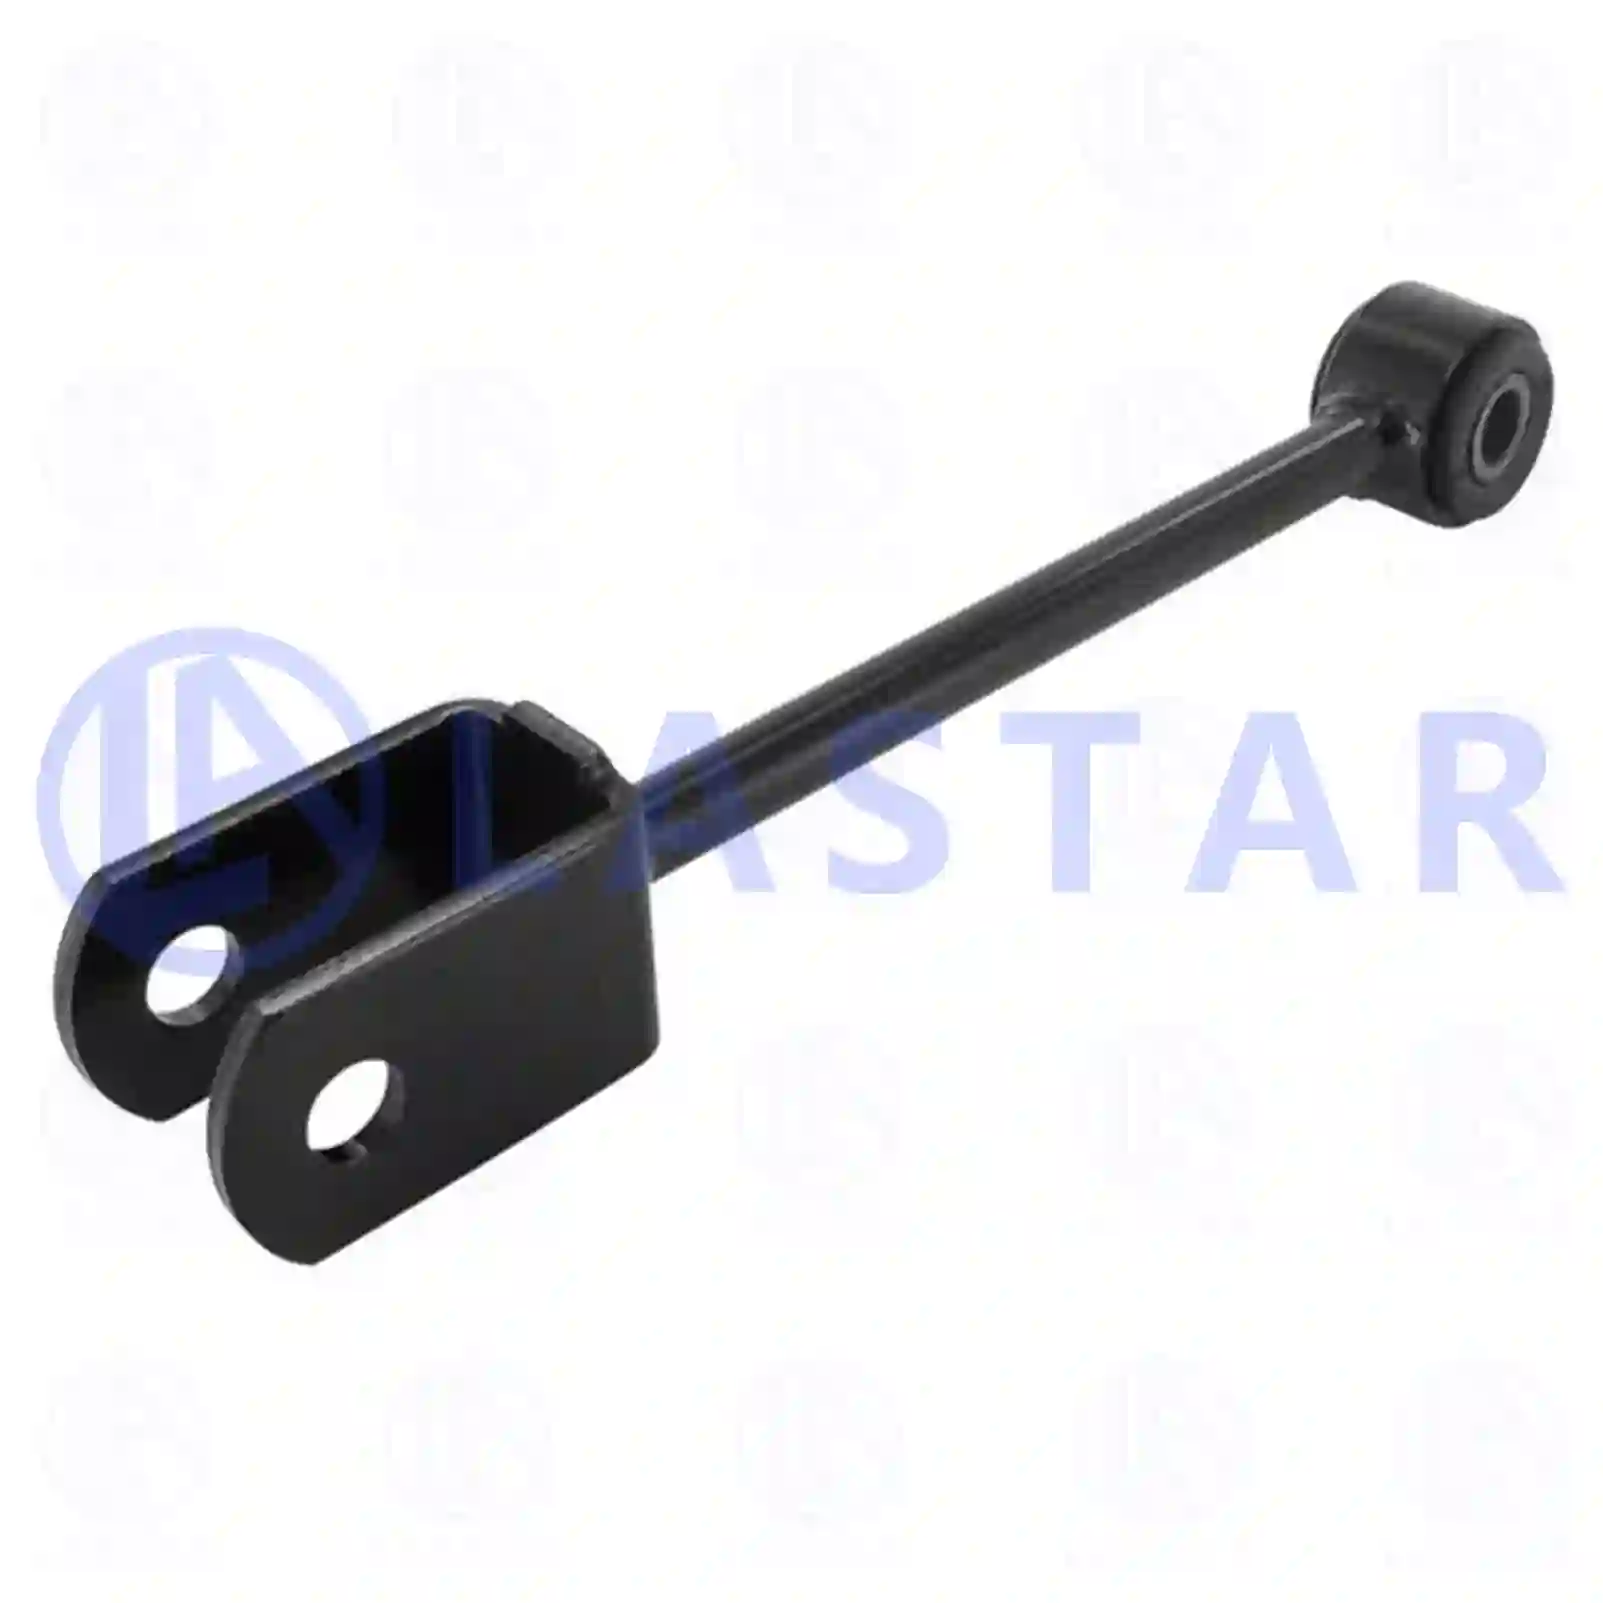  Stabilizer stay || Lastar Spare Part | Truck Spare Parts, Auotomotive Spare Parts